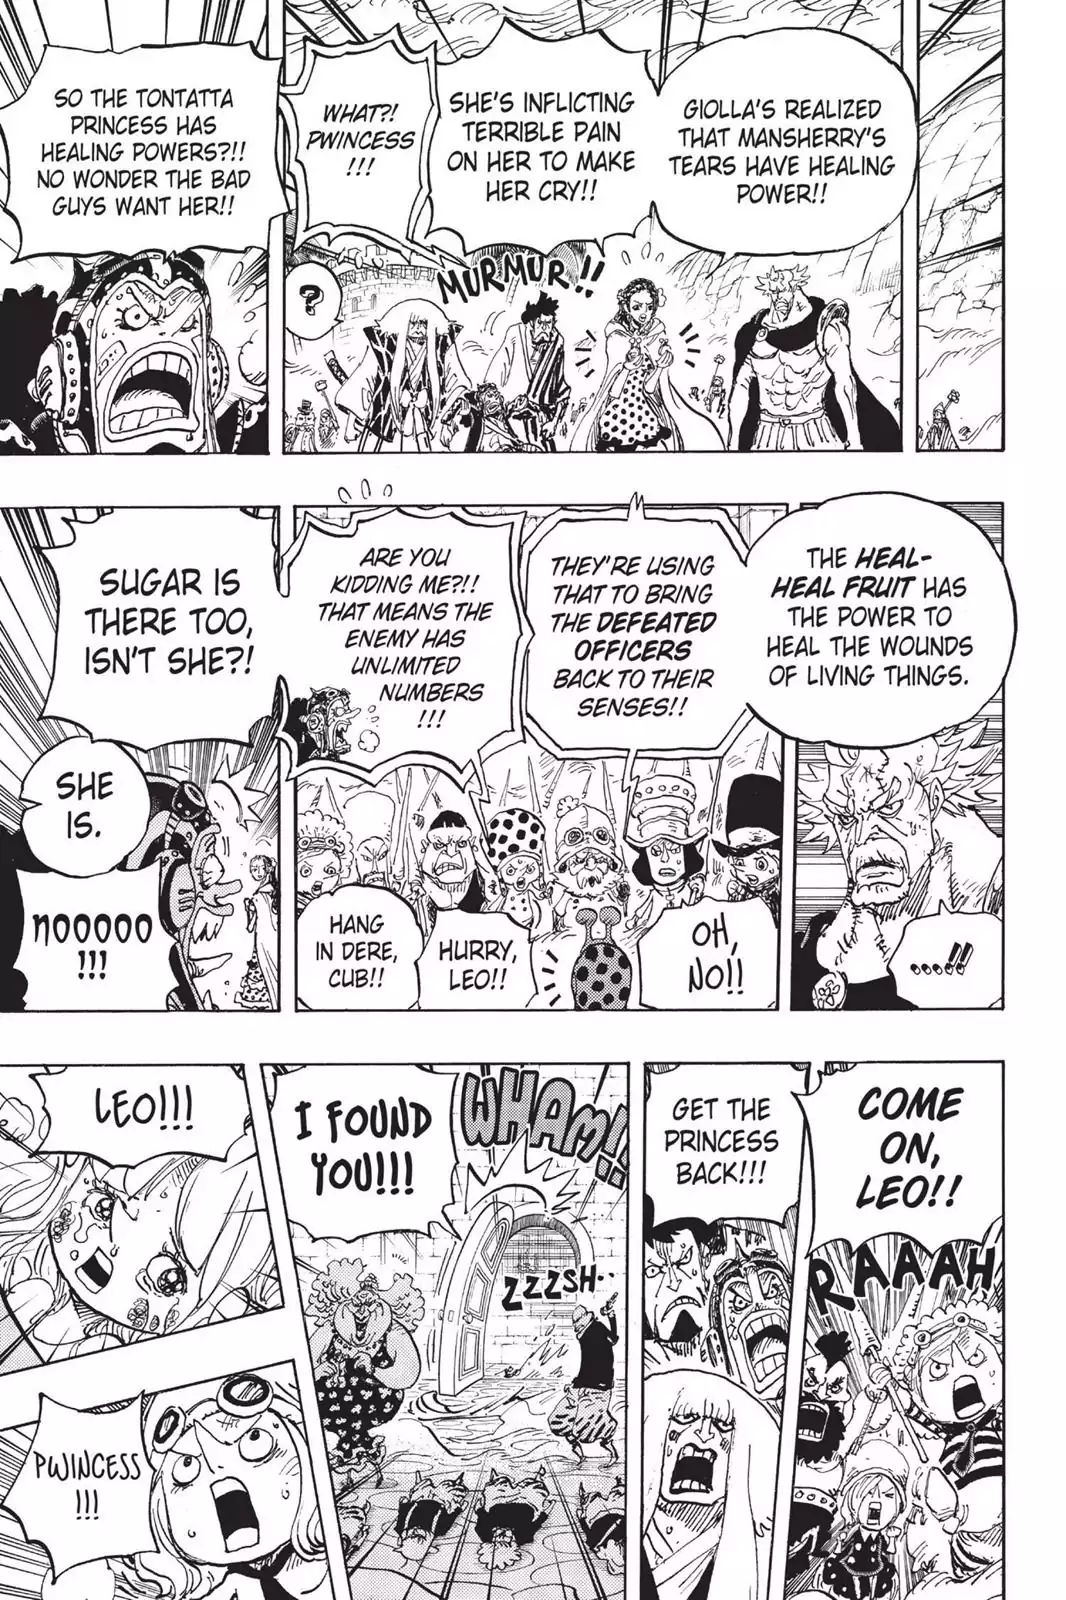 One Piece, Chapter 774 - One Piece Manga Online